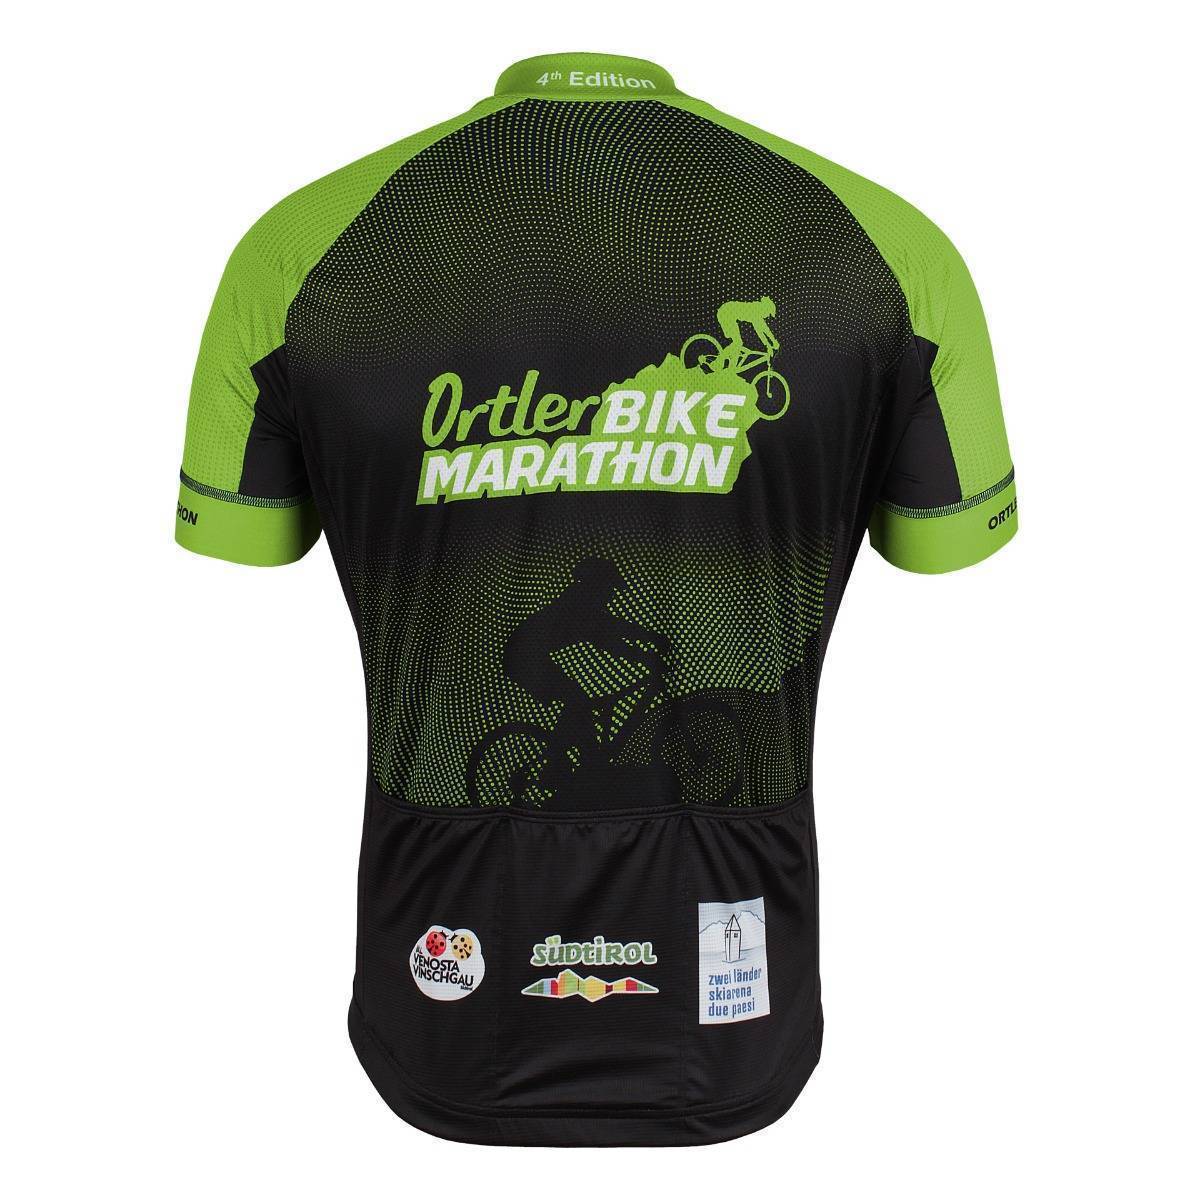 2018 Ortler Bike Marathon Short-sleeved jersey powered by Bicycle Line